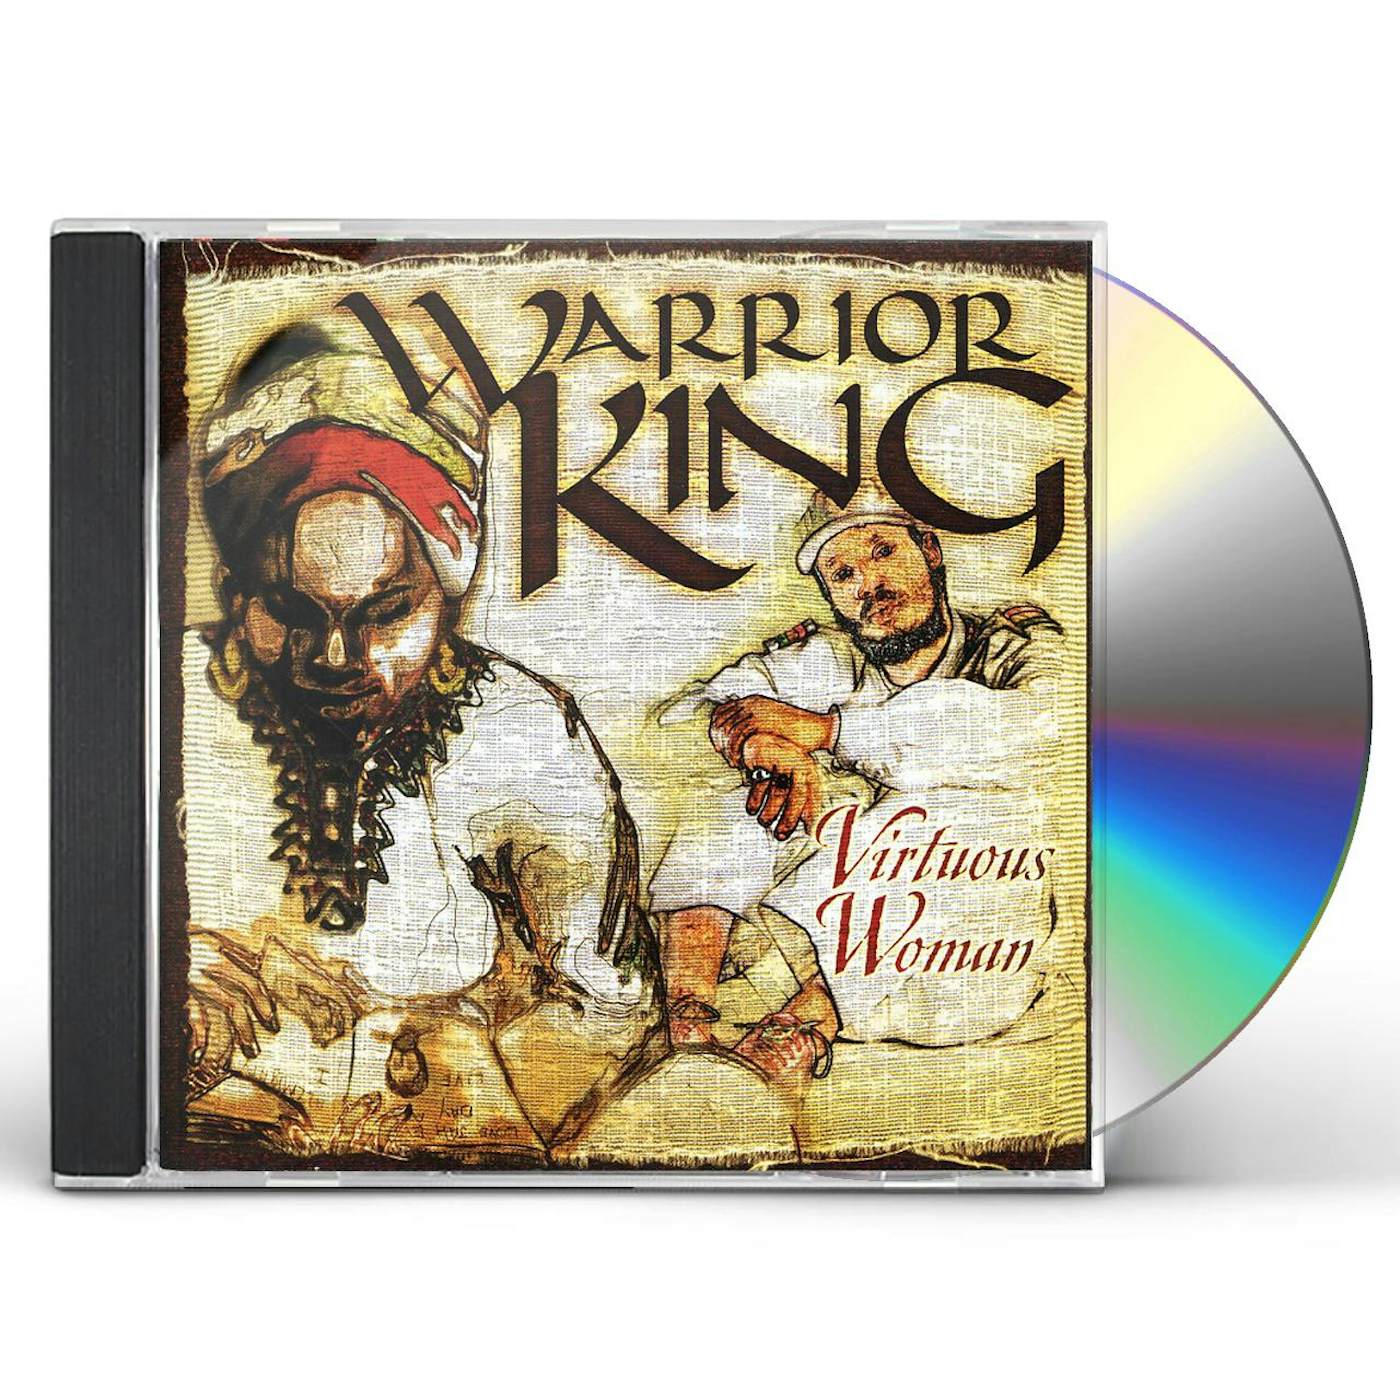 Warrior King VIRTUOUS WOMAN CD